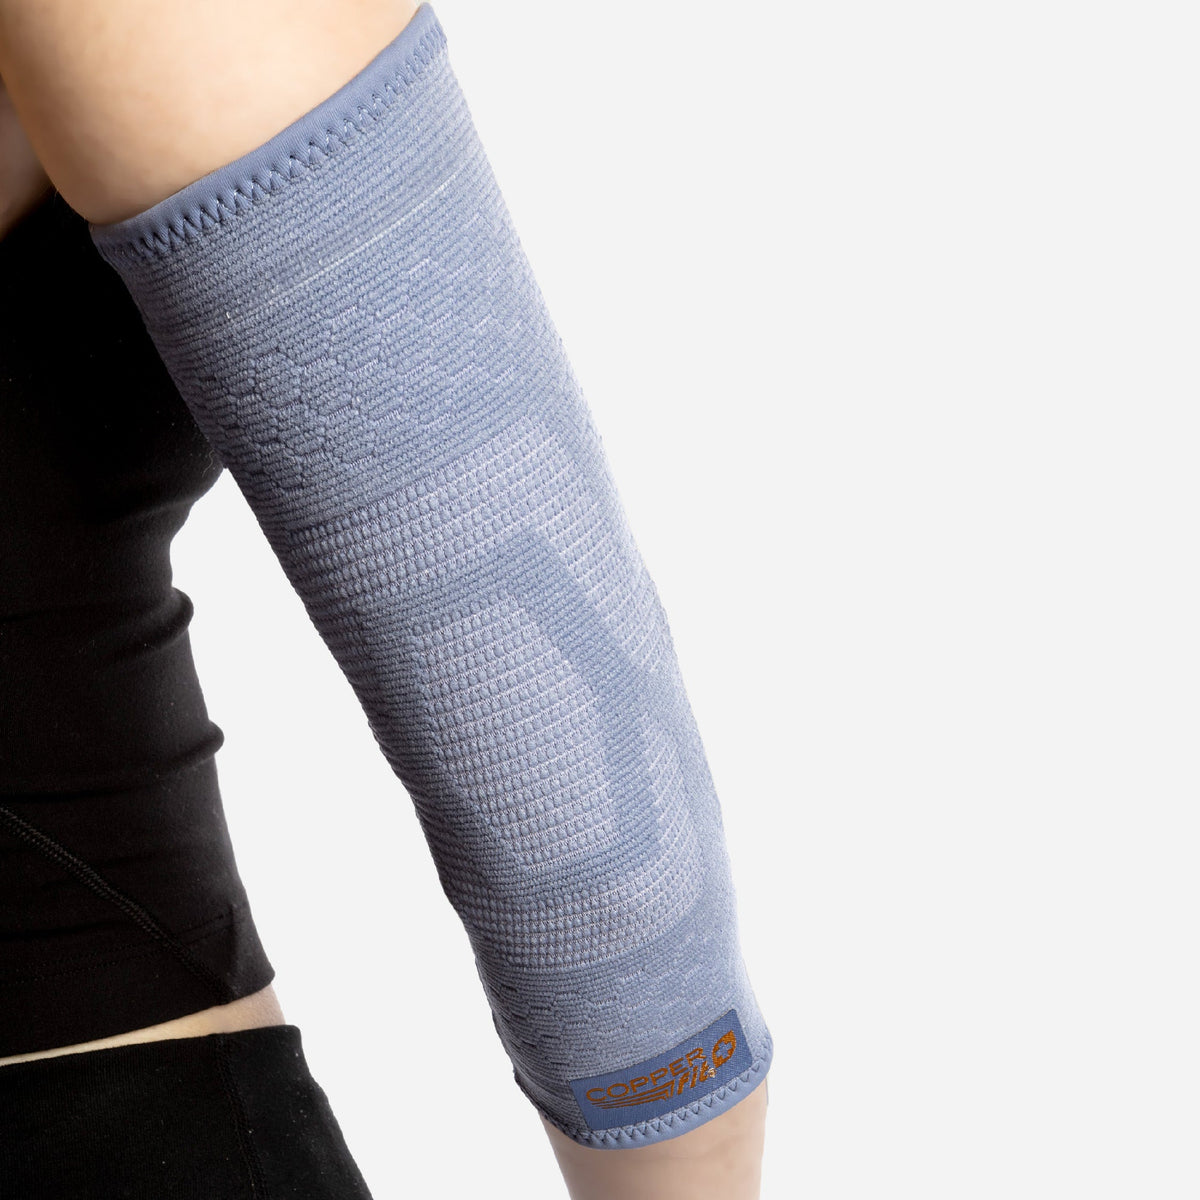 Get your Gwyneth Paltrow Compression Elbow Sleeve at Copper Fit USA®!